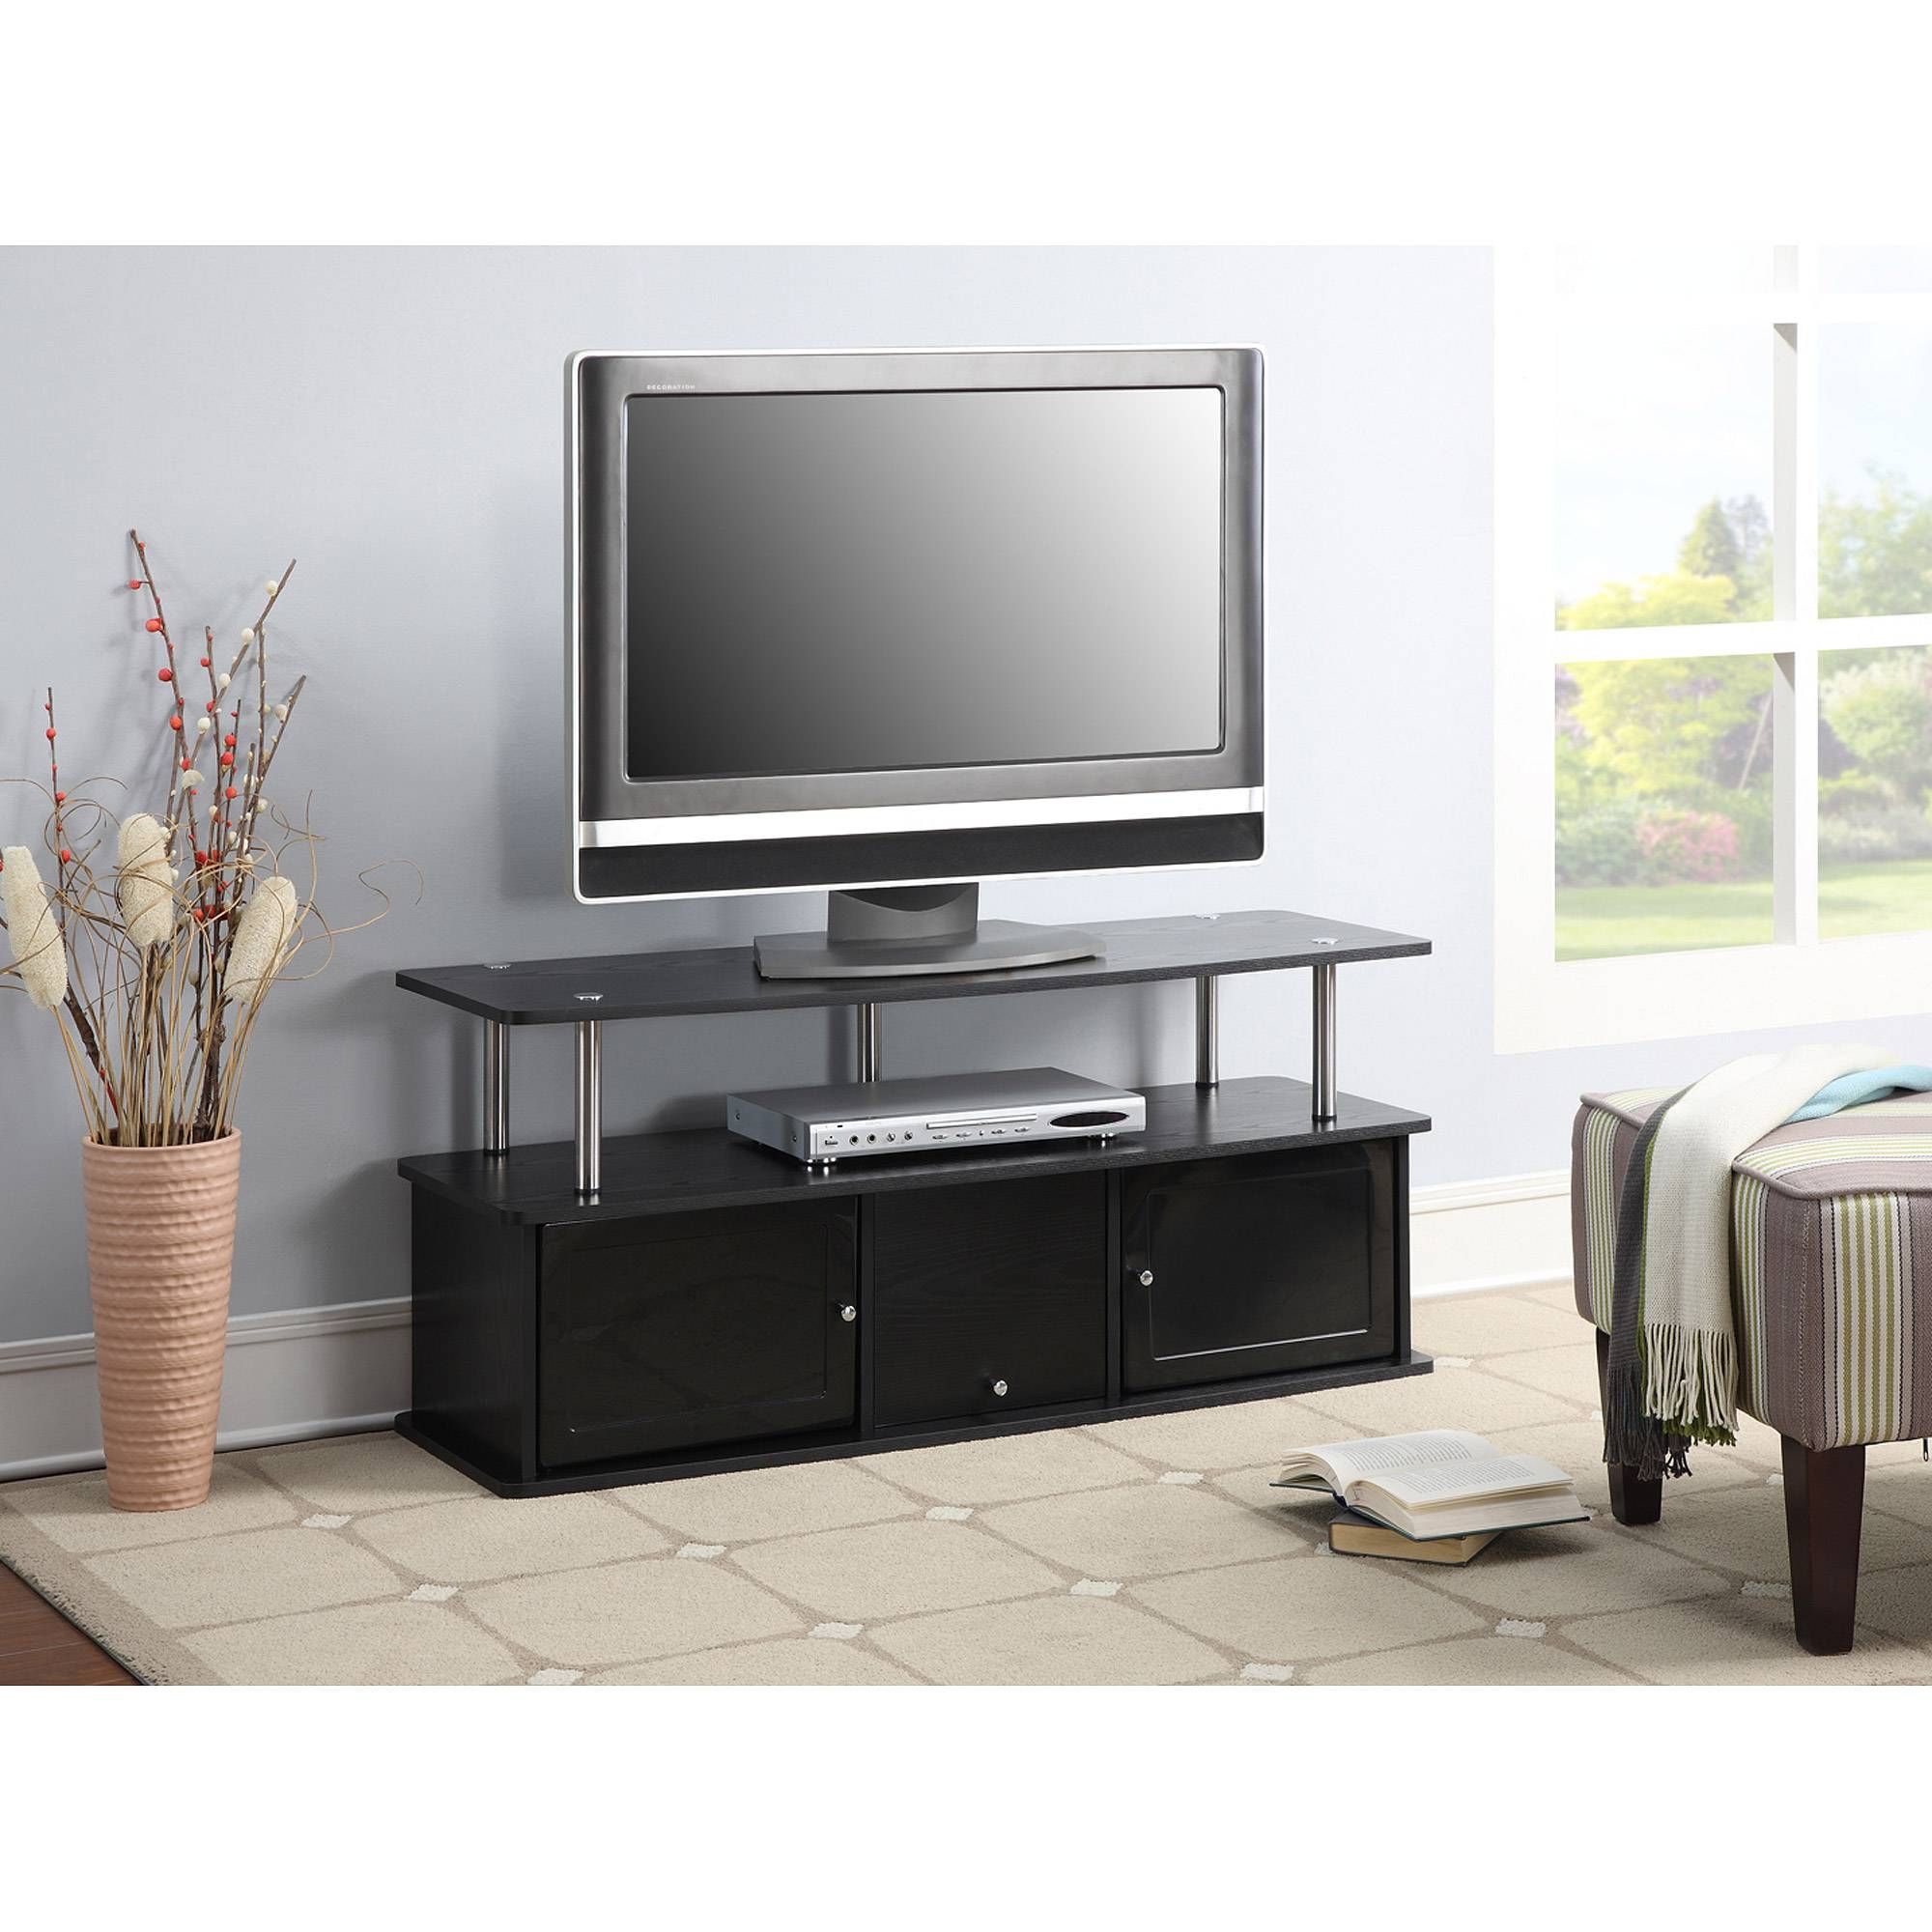 Beautiful Teak Wood Tv Stand 22 With Additional Home Wallpaper Intended For Wooden Tv Stands And Cabinets (View 5 of 15)